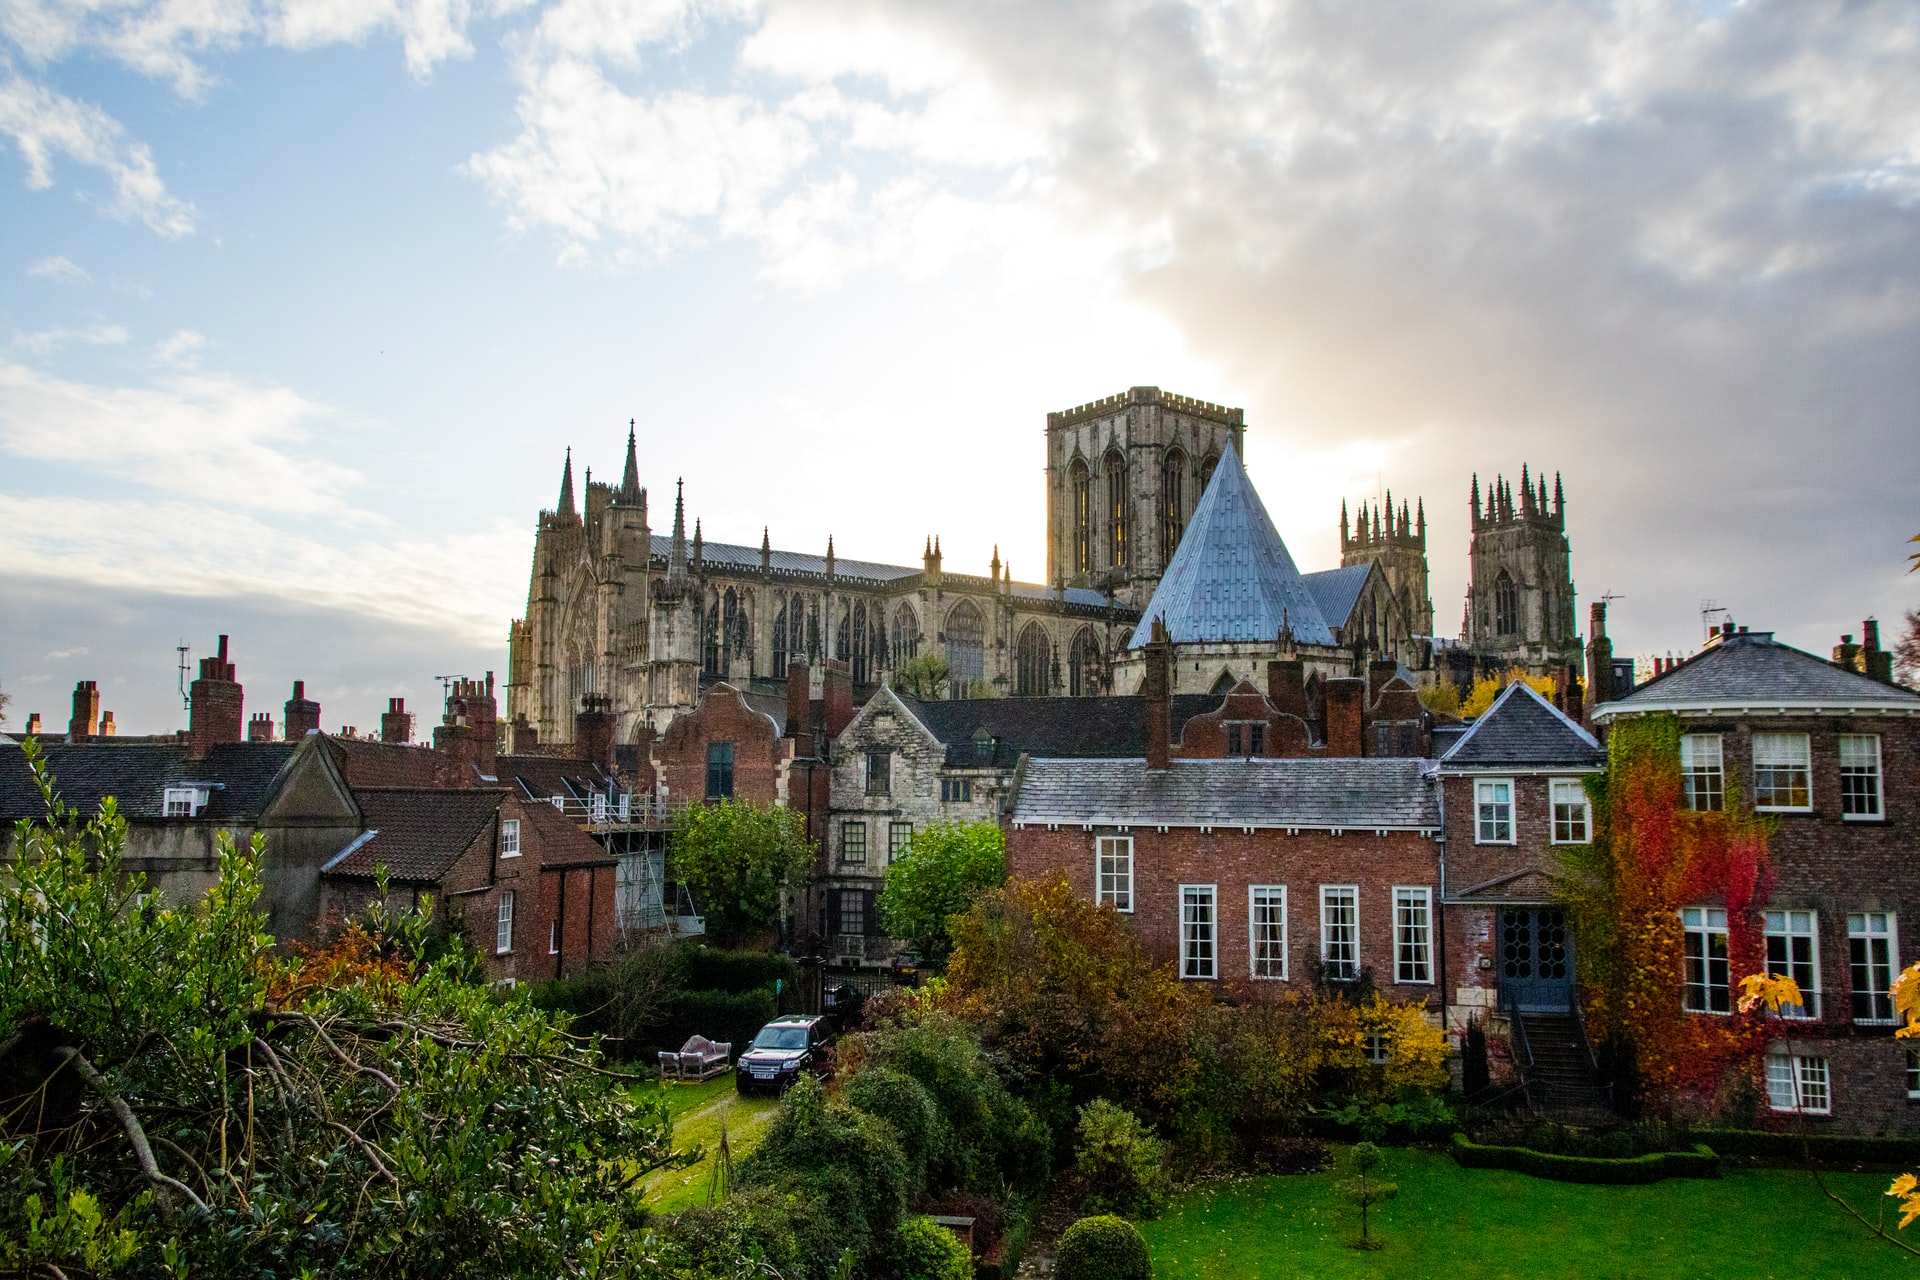 buildings-and-gardens-at-the-back-of-a-church-york-minster